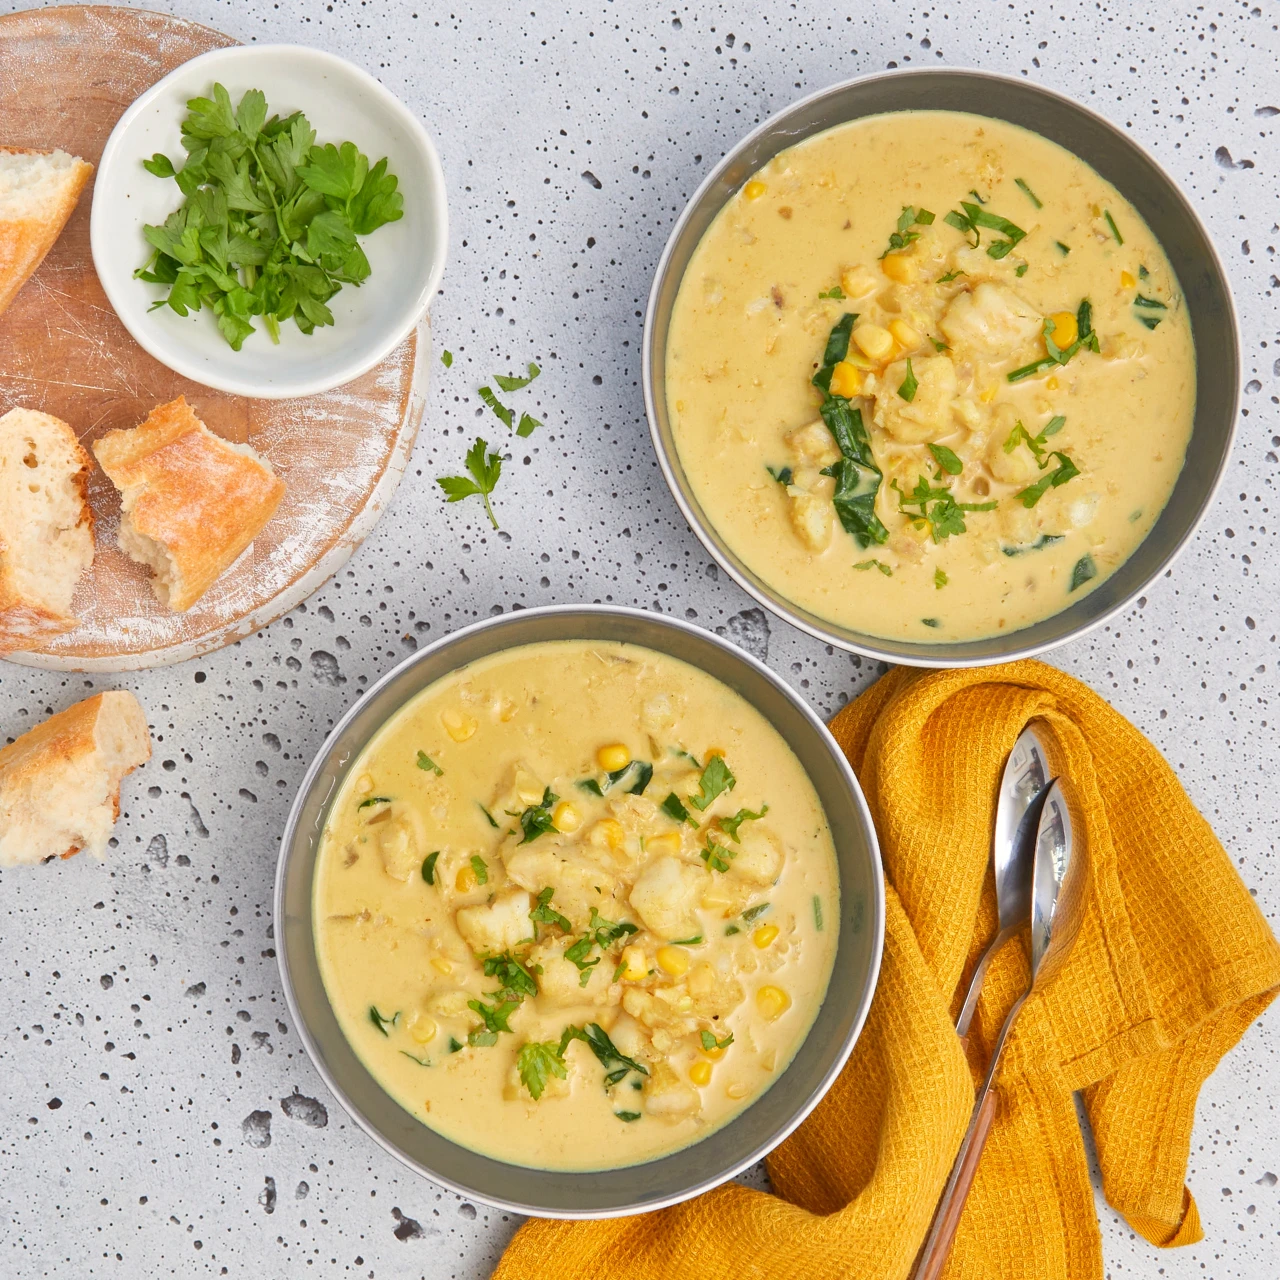 Spiced Hoki Coconut Chowder with crusty bread. An easy and warming recipe for winter.